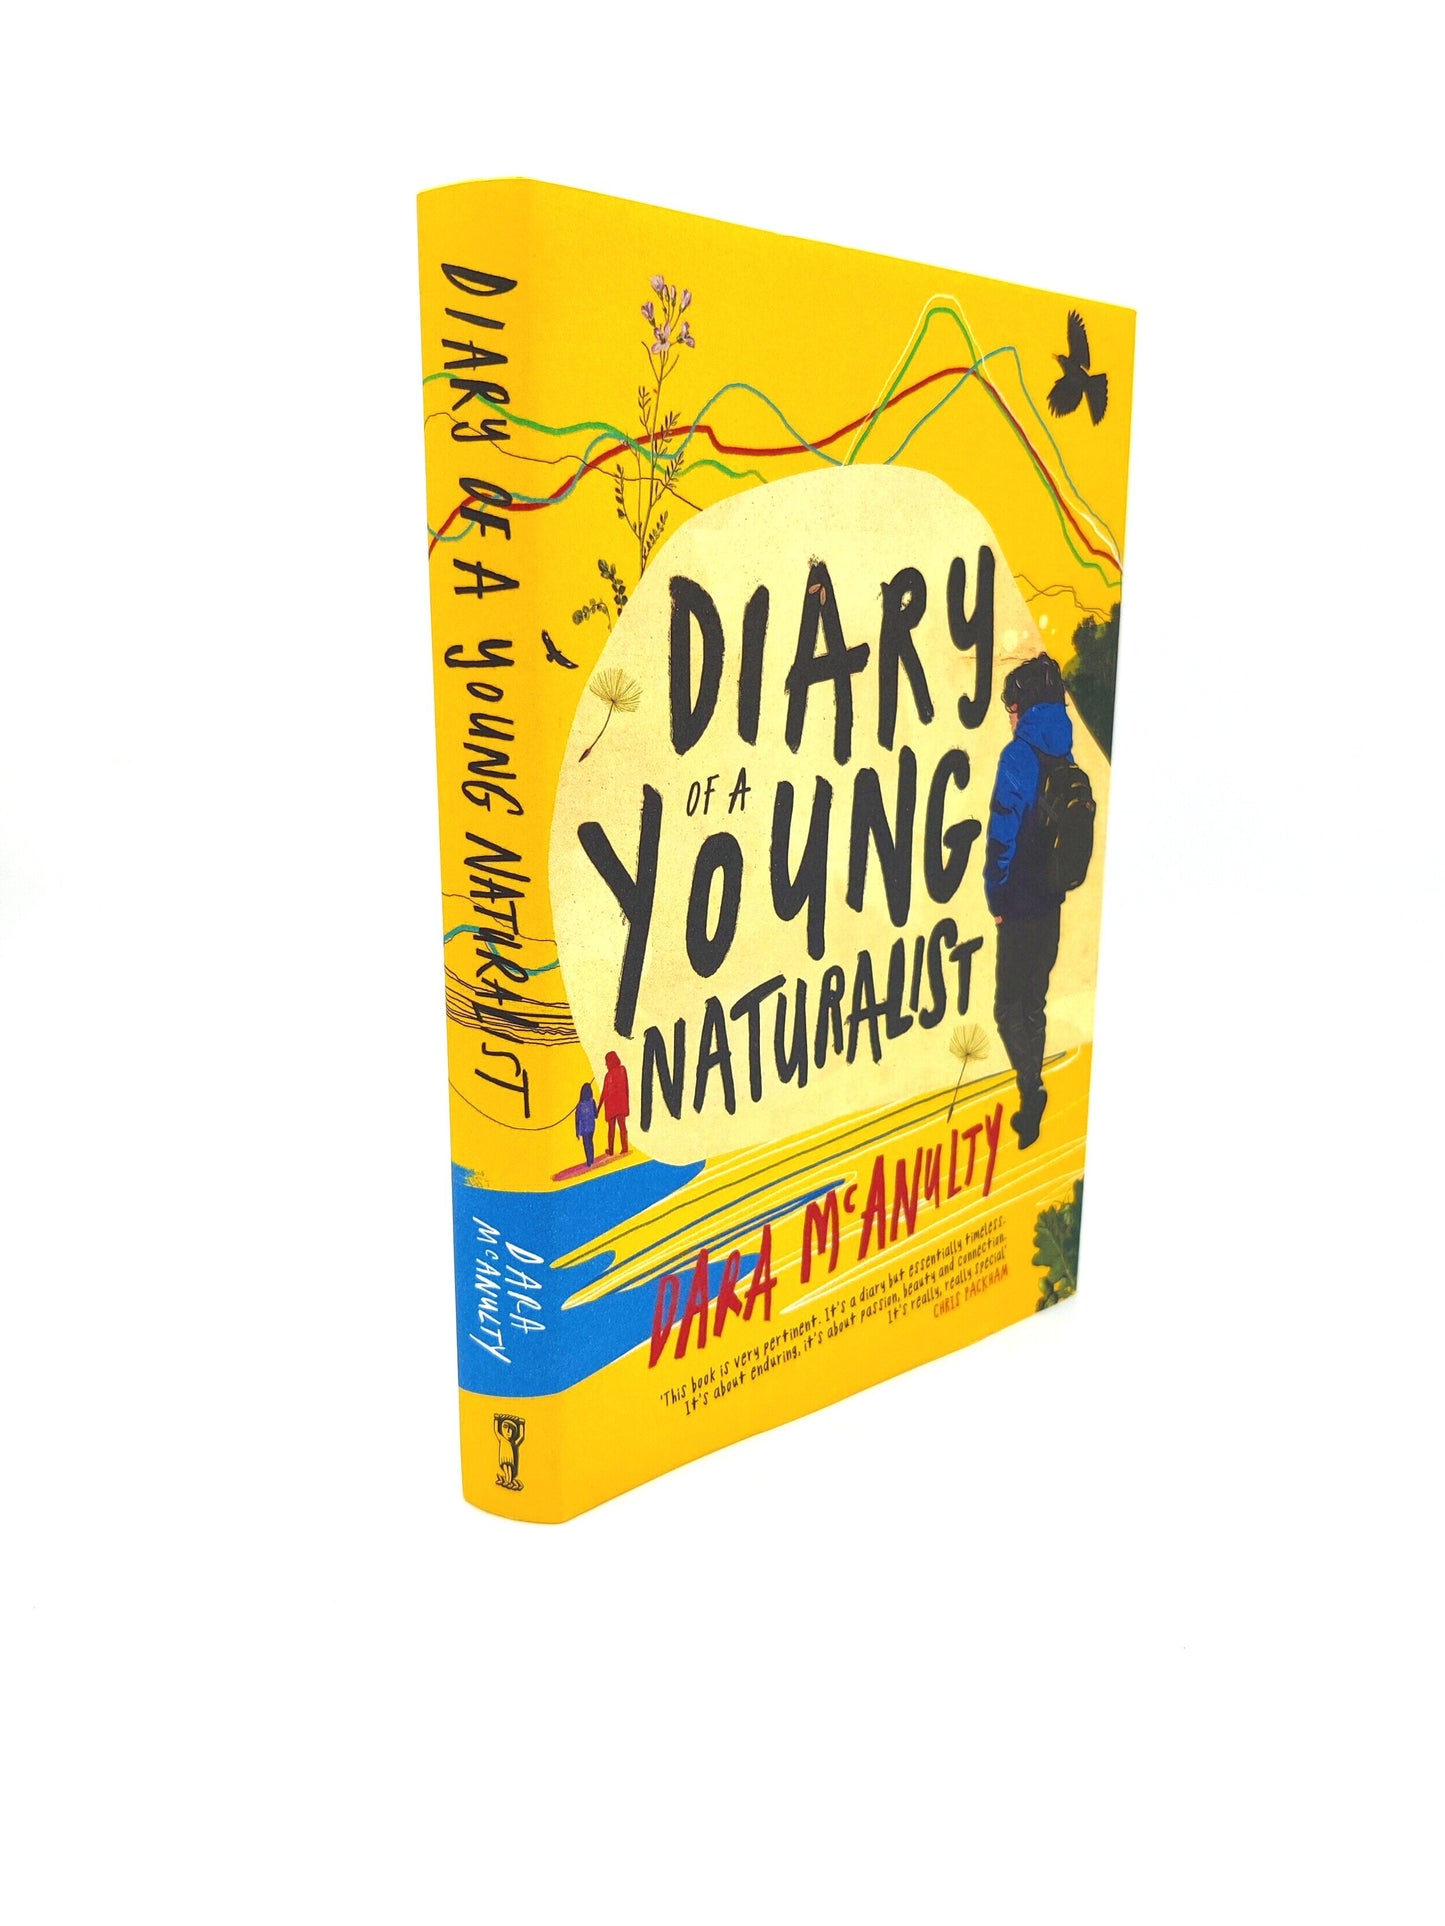 Side View of Diary of a Young Naturalist by Dara McAnulty